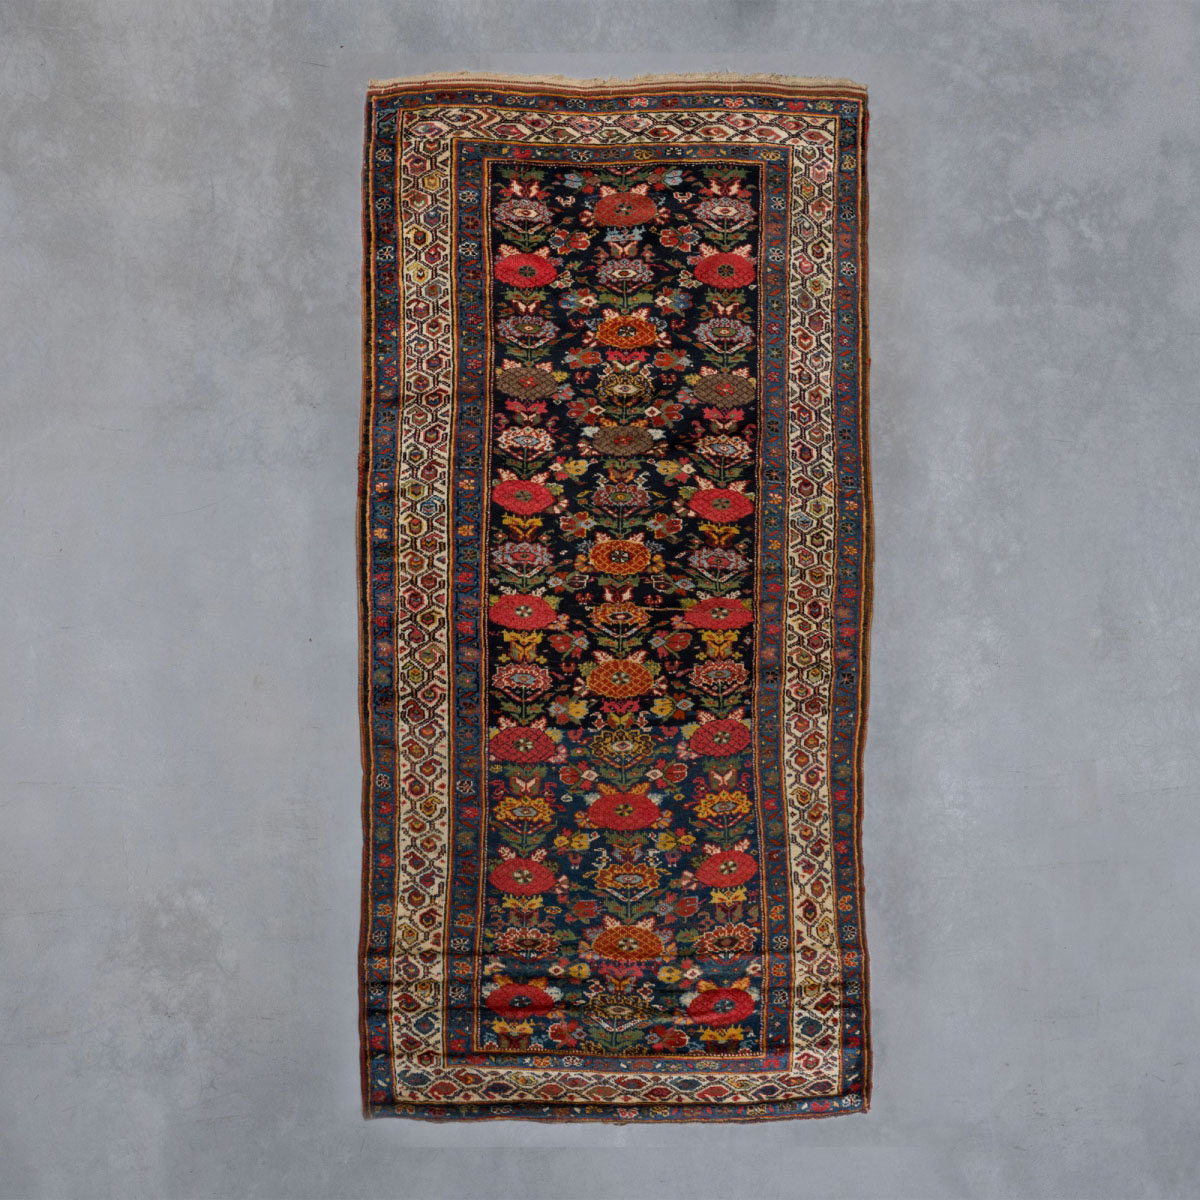 Tappeto Afshar | 269 x 120 cm  Antique carpets - Persia  pic-1